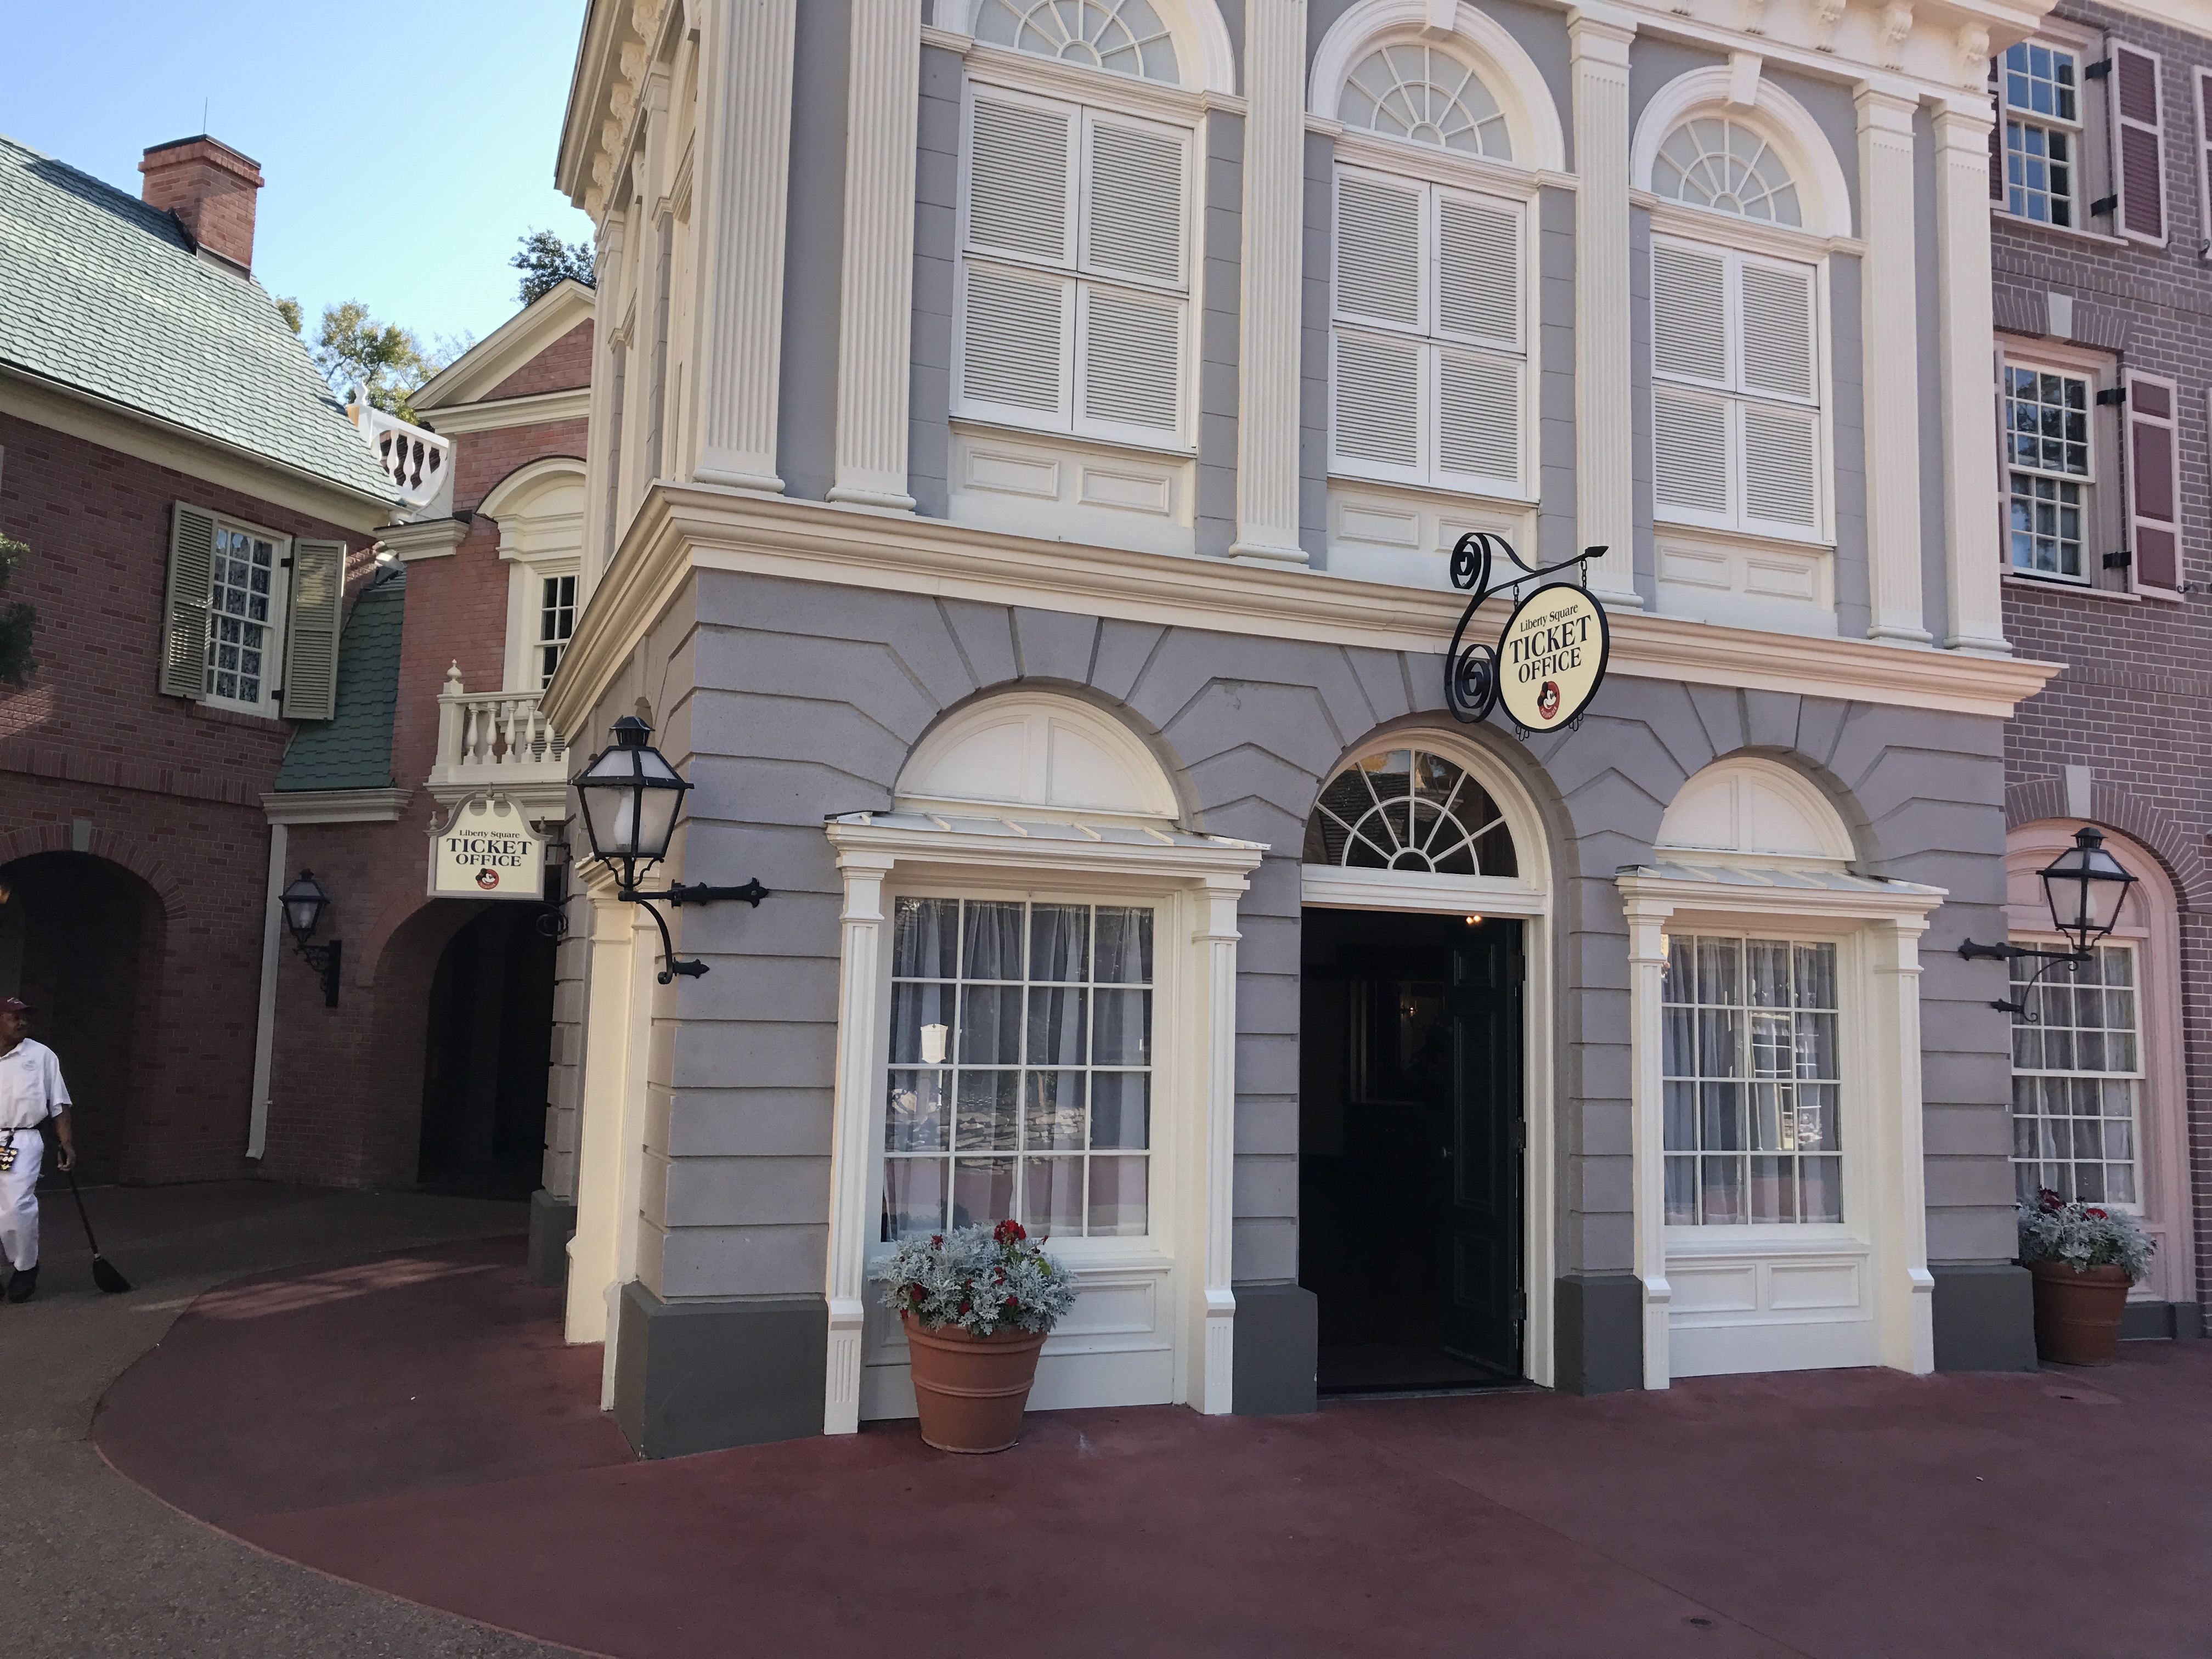 PHOTOS: Ticket Office Opens in Liberty Square at the Magic Kingdom